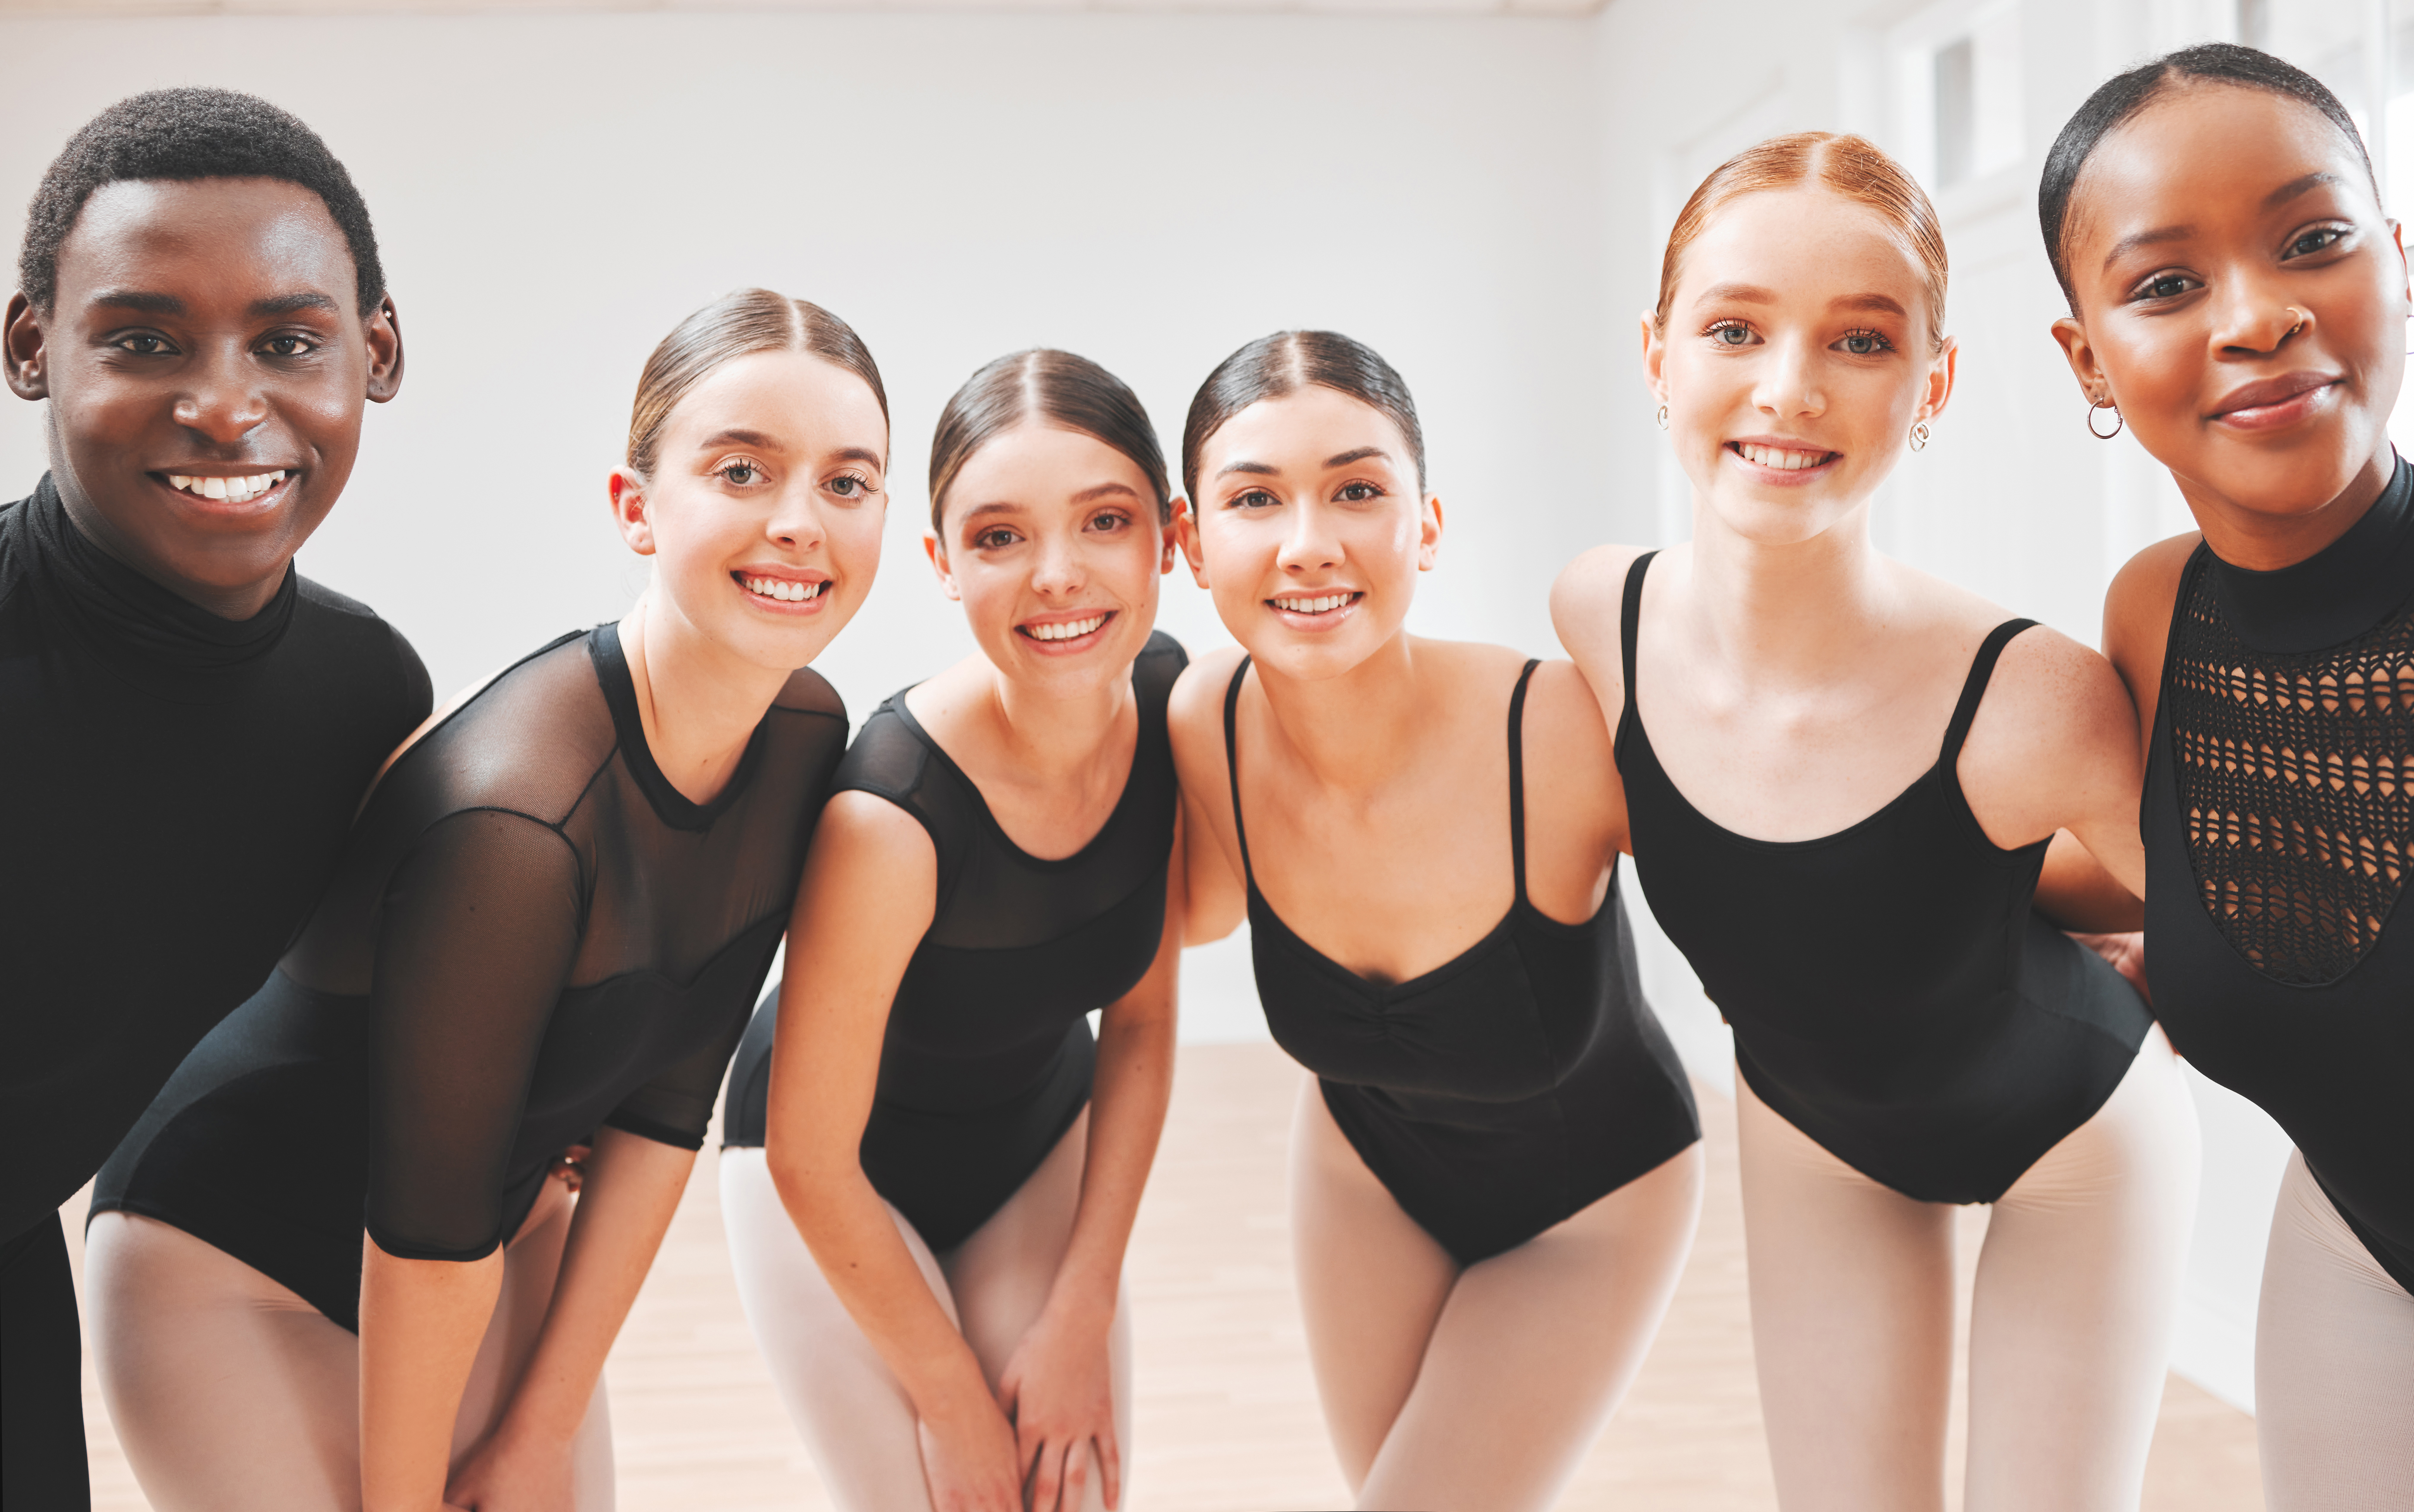 Announcing Pointe+, Our New Digital Subscription for Ballet Dancers